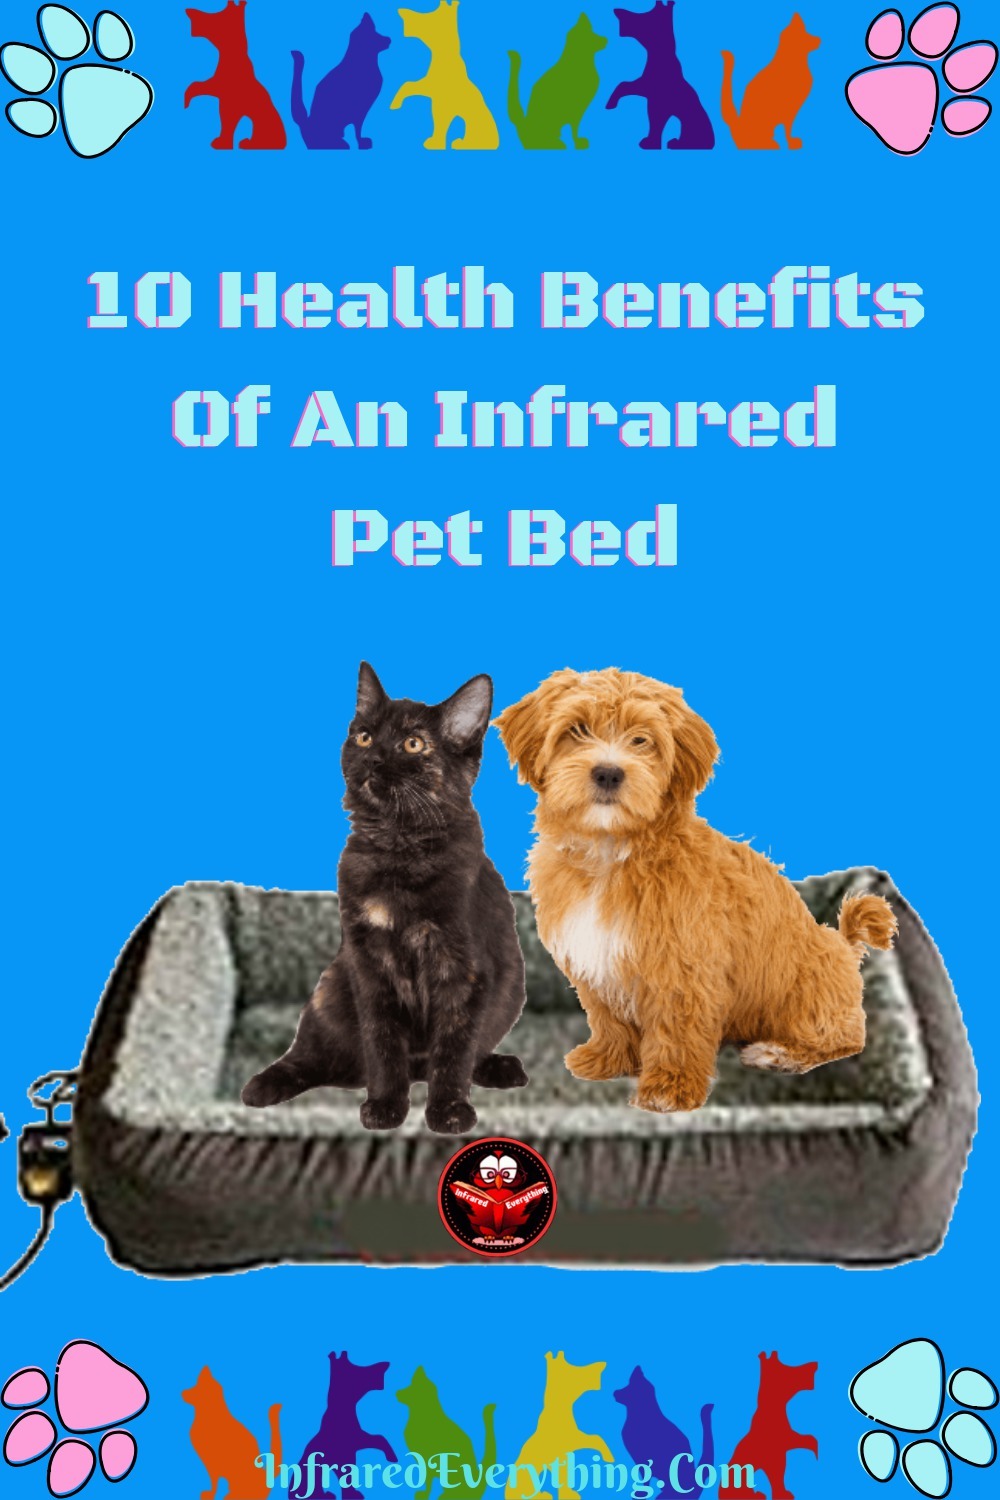 Dog & Cat sitting On Infrared Pet Bed